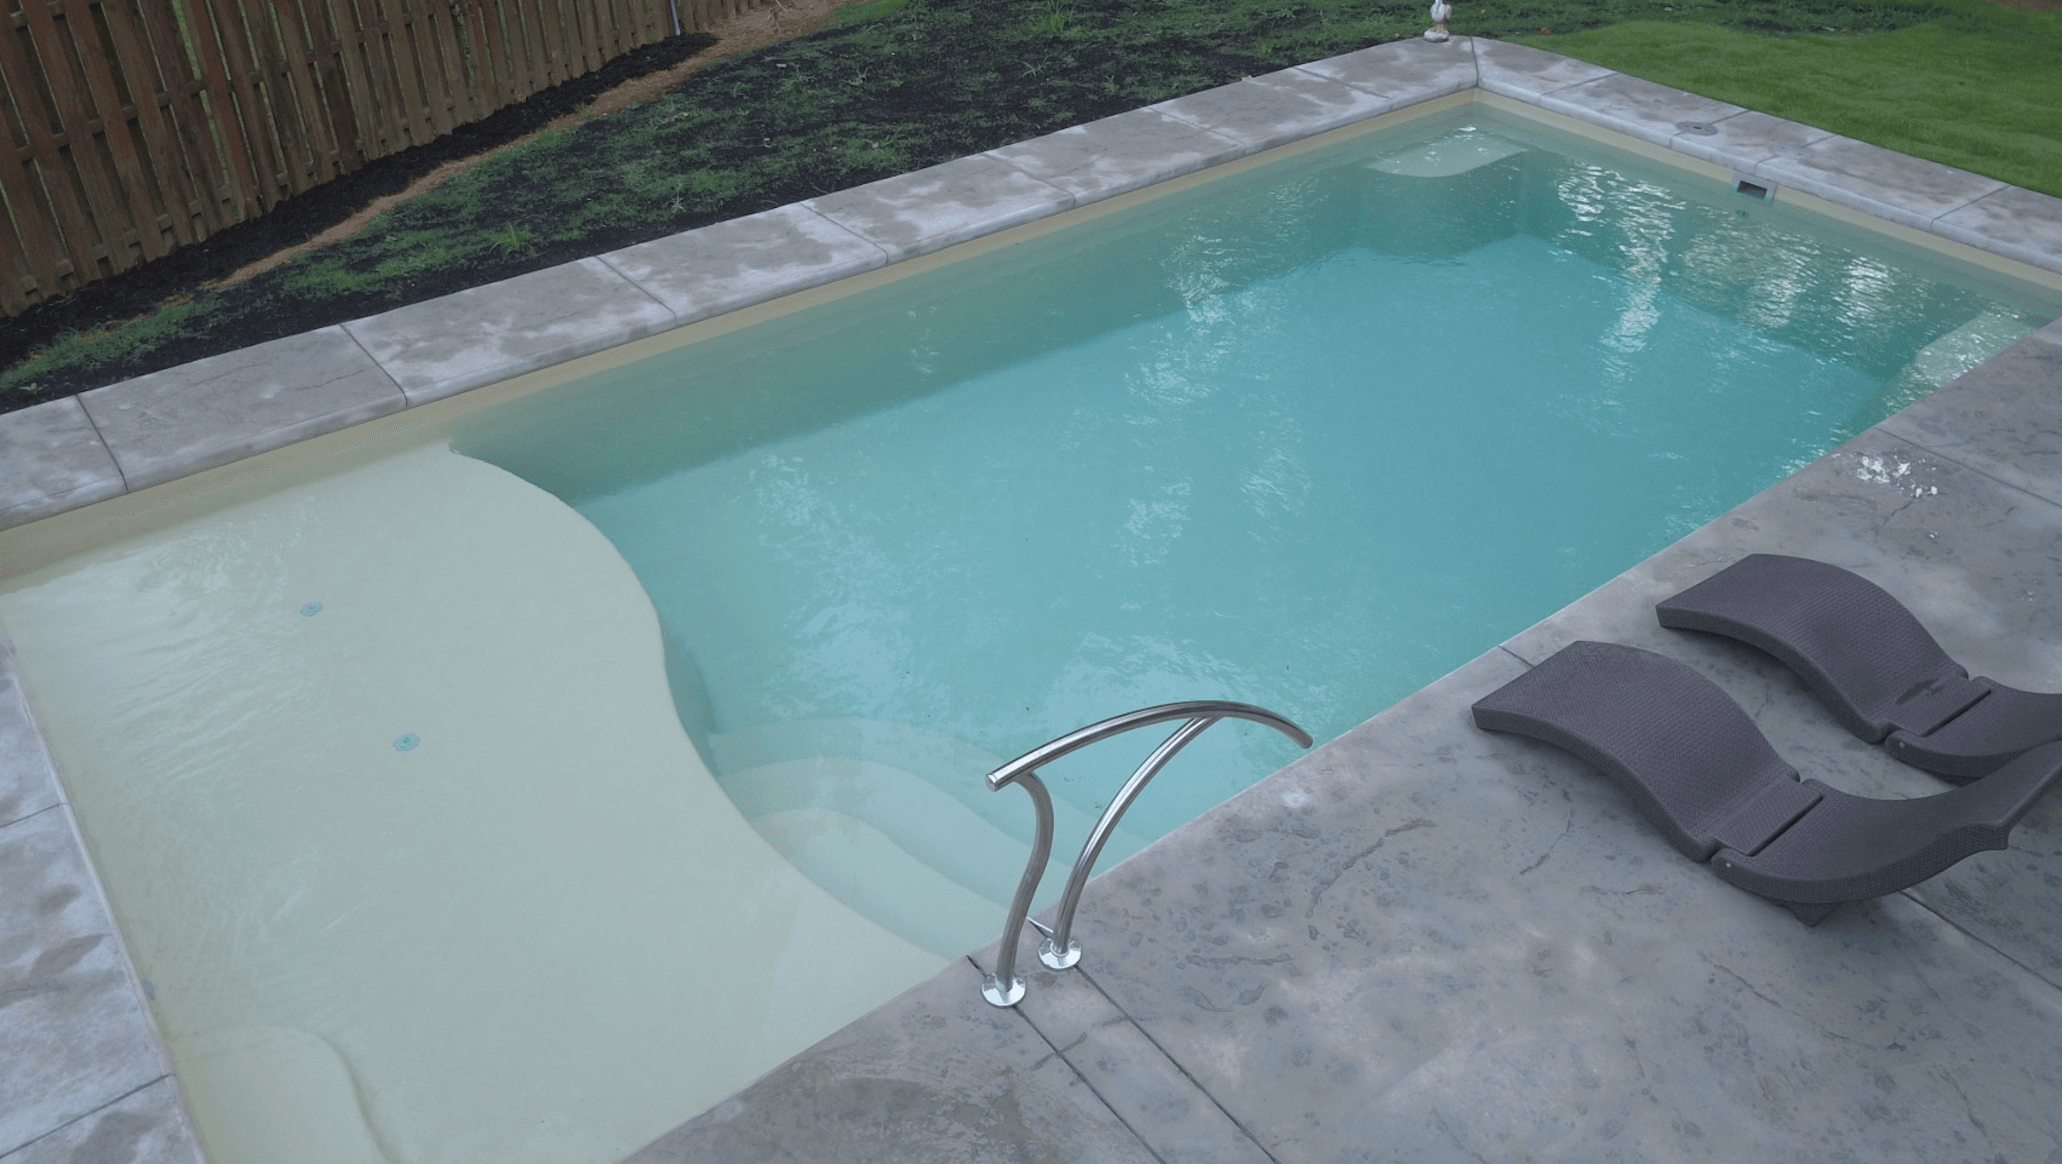 What’s the Best Small Fiberglass Pool for Your Needs? Costs, Sizes, Features